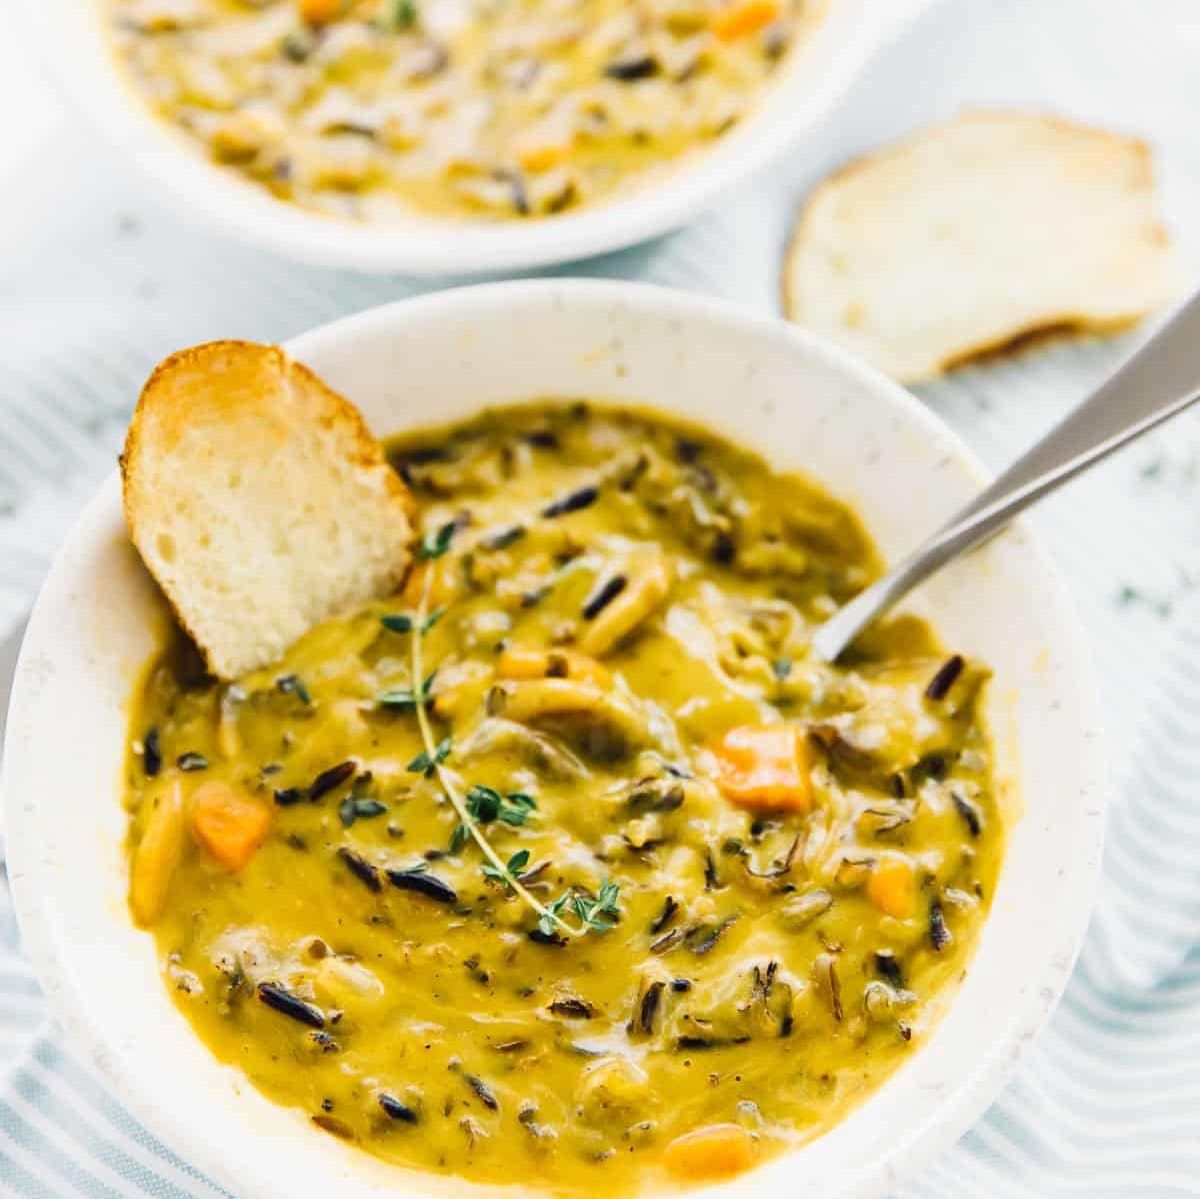 Vegan mushroom wild rice soup served with a slice of bread